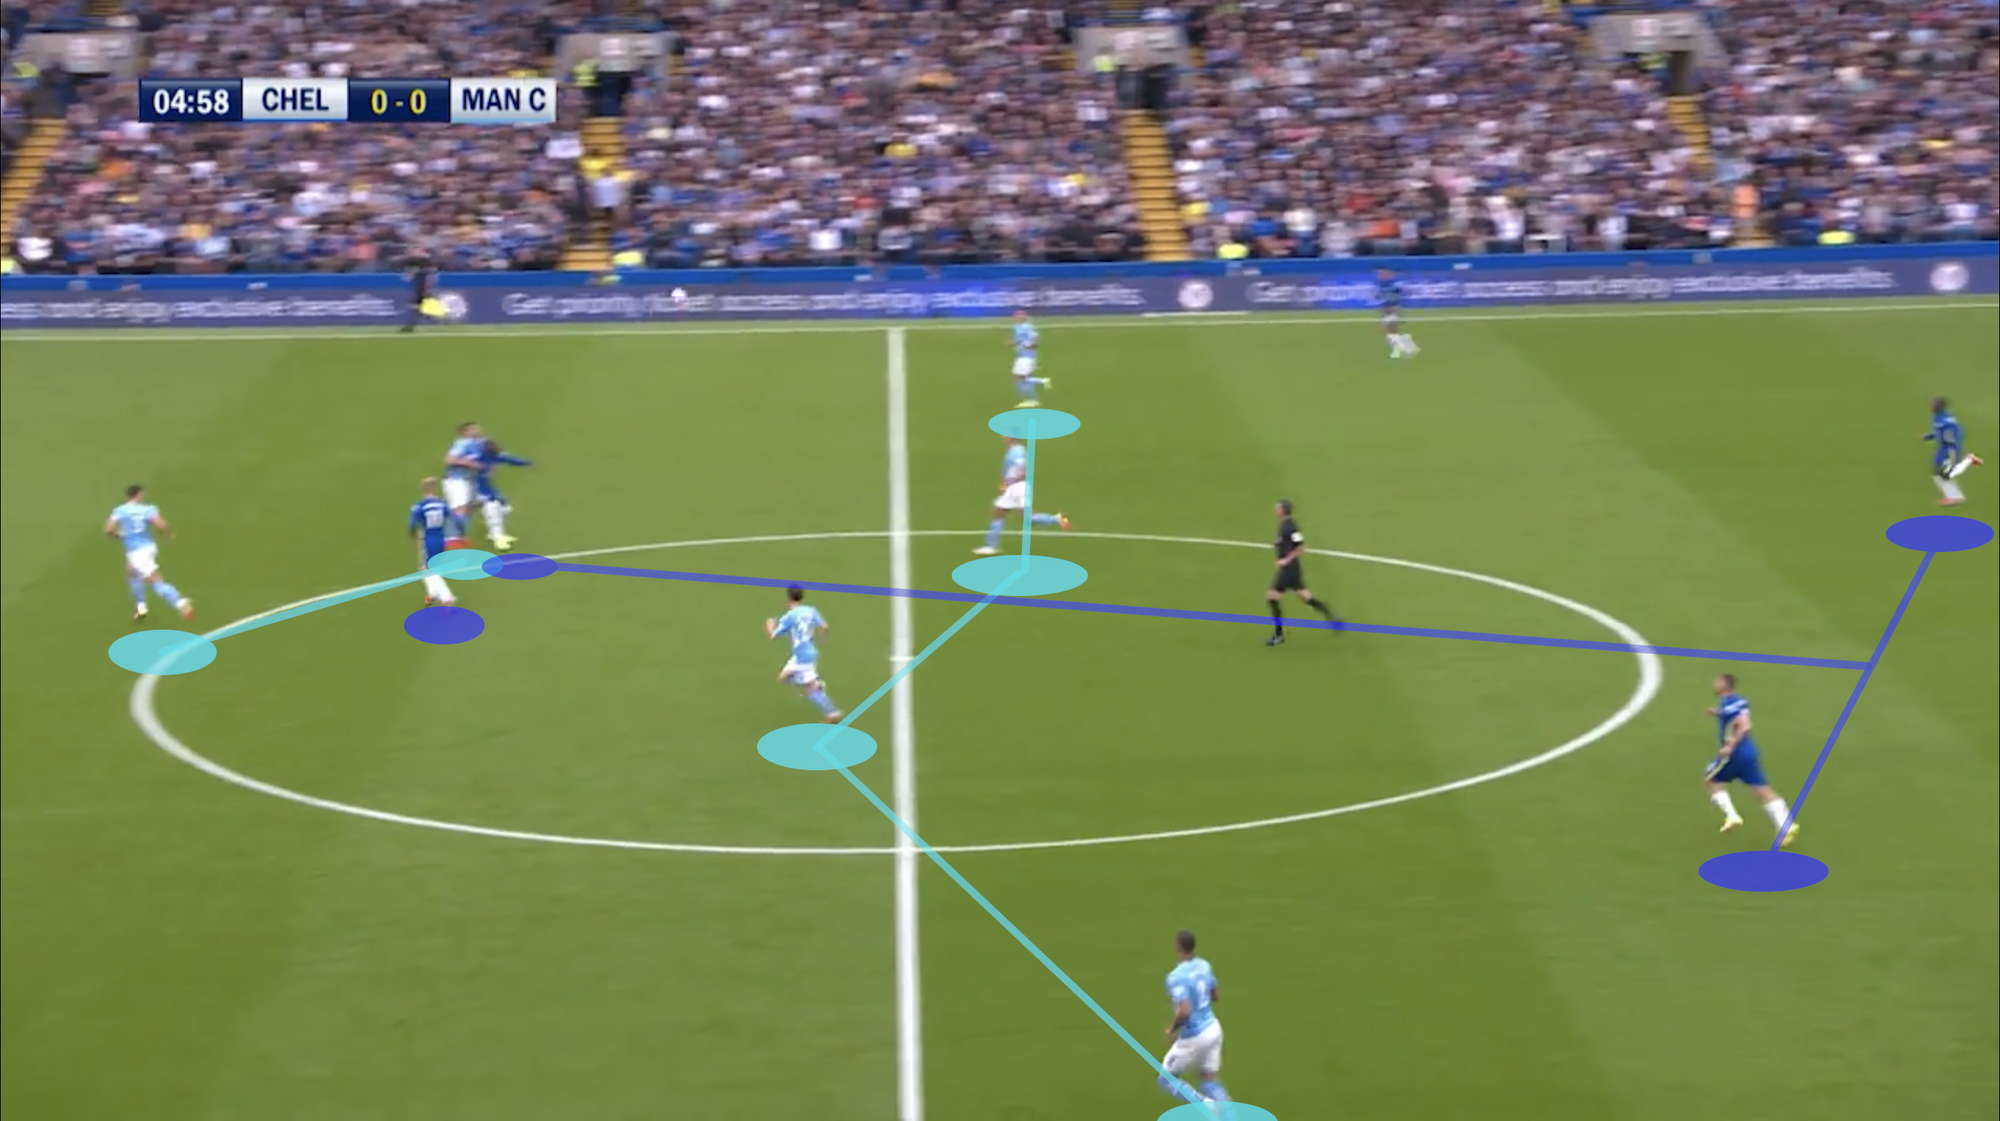 Chelsea lose at home against title rivals Man City - Tactical Analysis